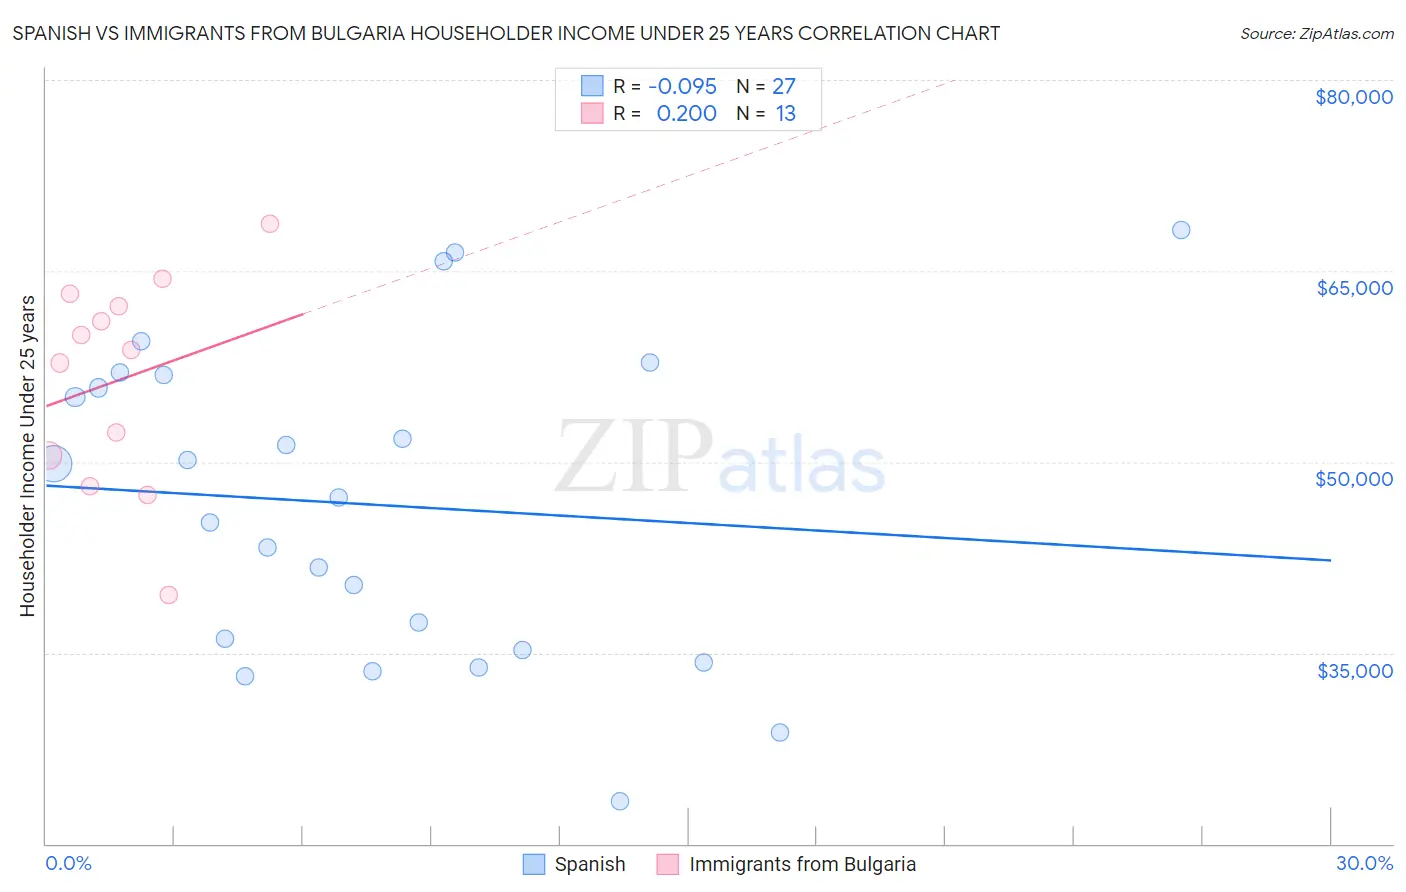 Spanish vs Immigrants from Bulgaria Householder Income Under 25 years